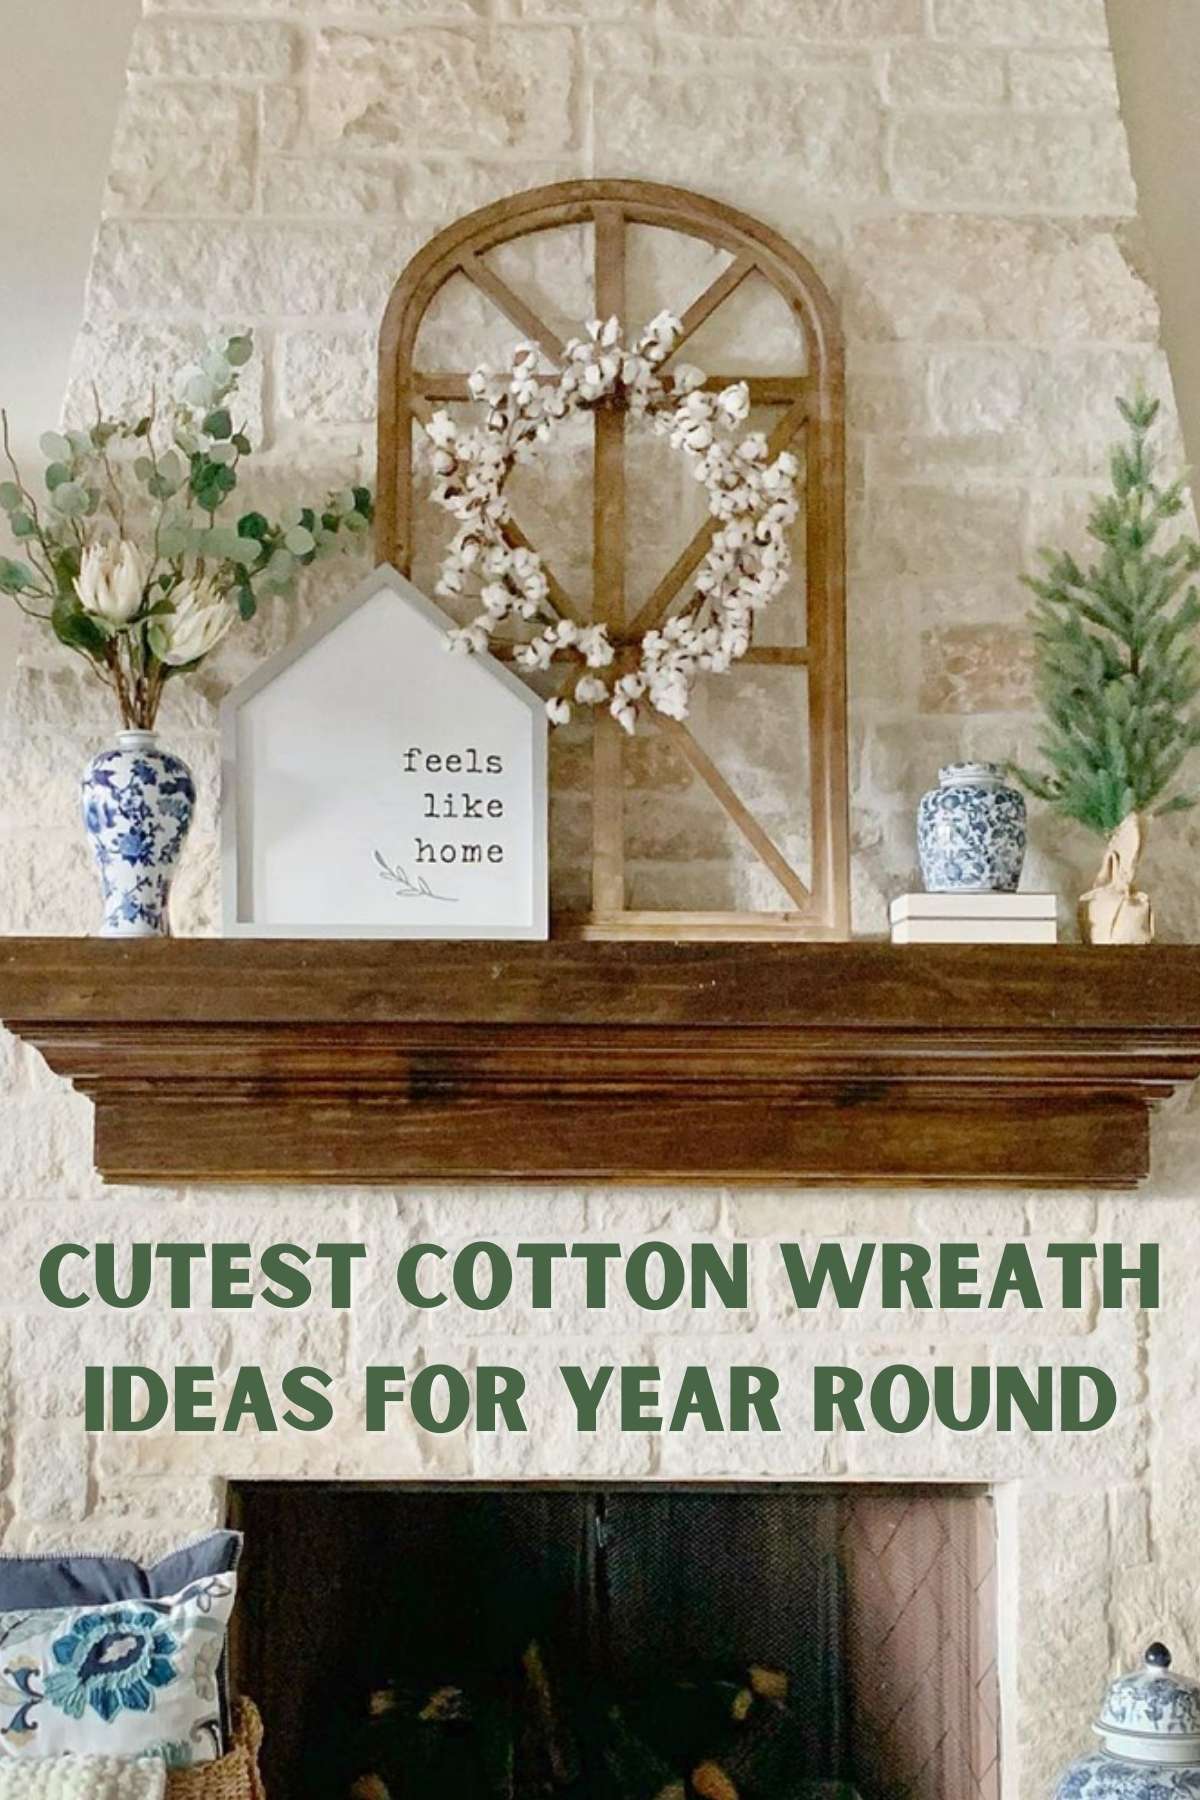 Cutest Cotton Wreath Ideas for Year Round. Photo of cotton wreath on top of mantle.